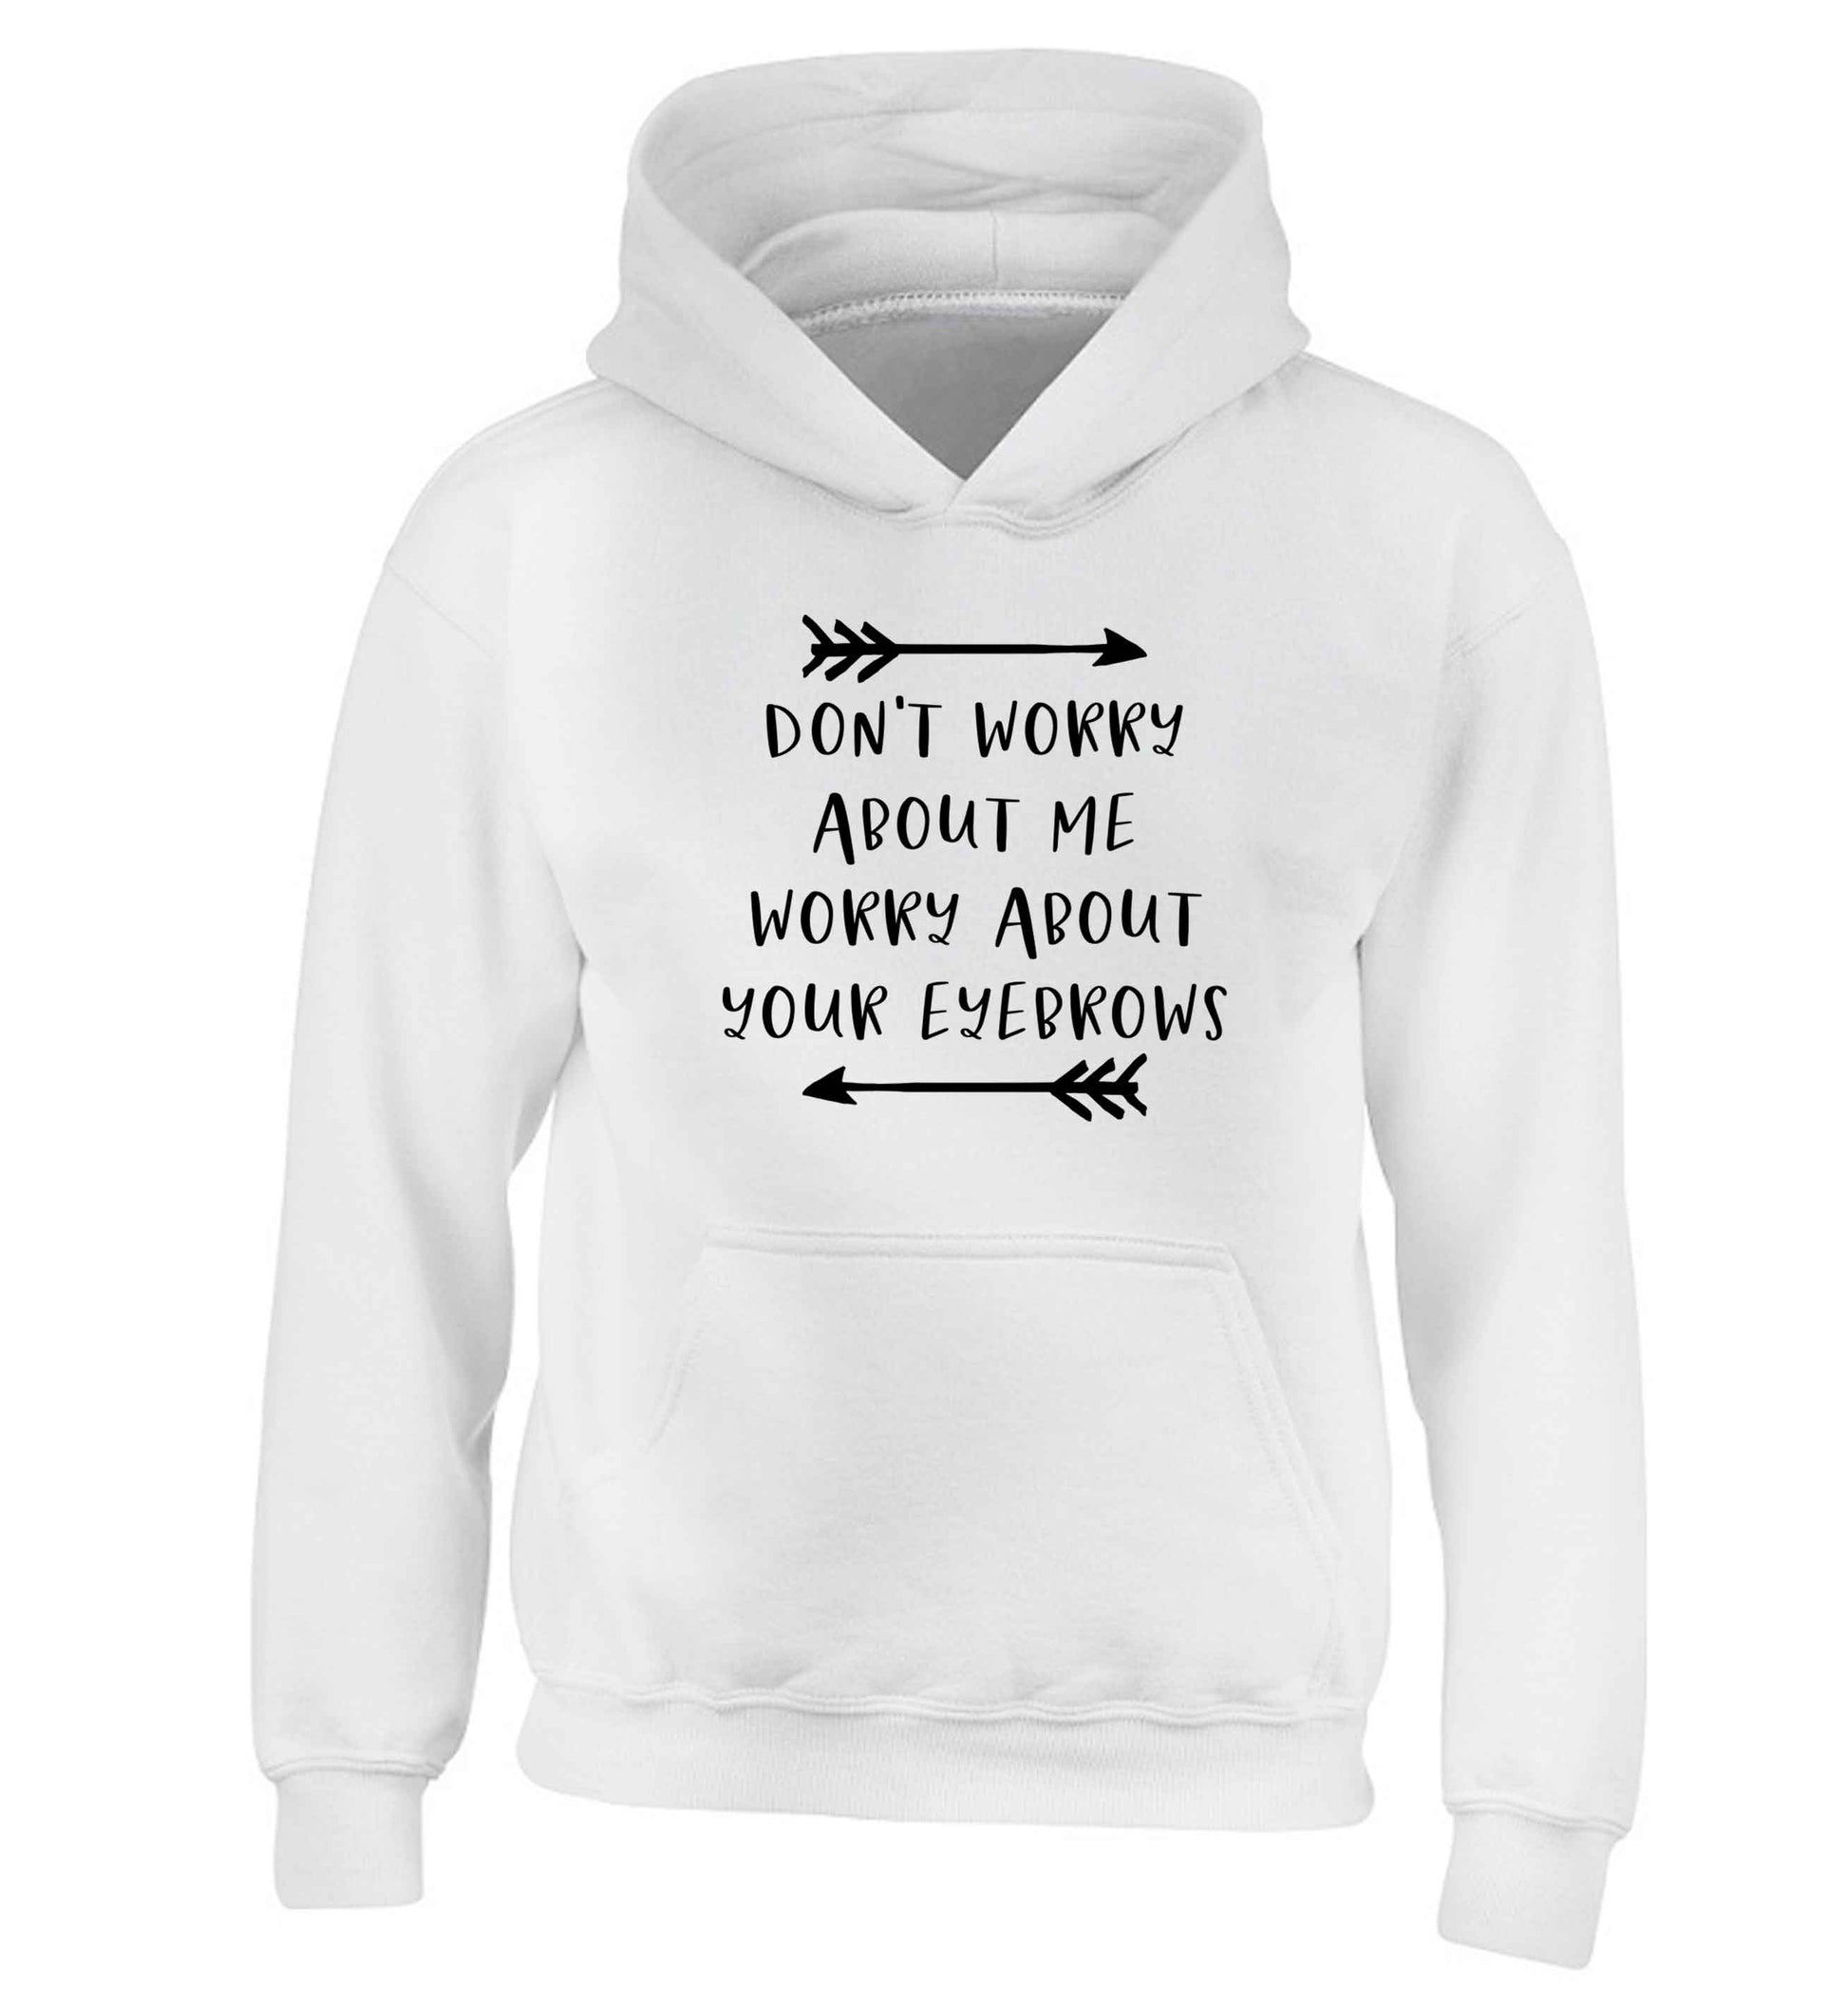 Don't worry about me worry about your eyebrows children's white hoodie 12-13 Years